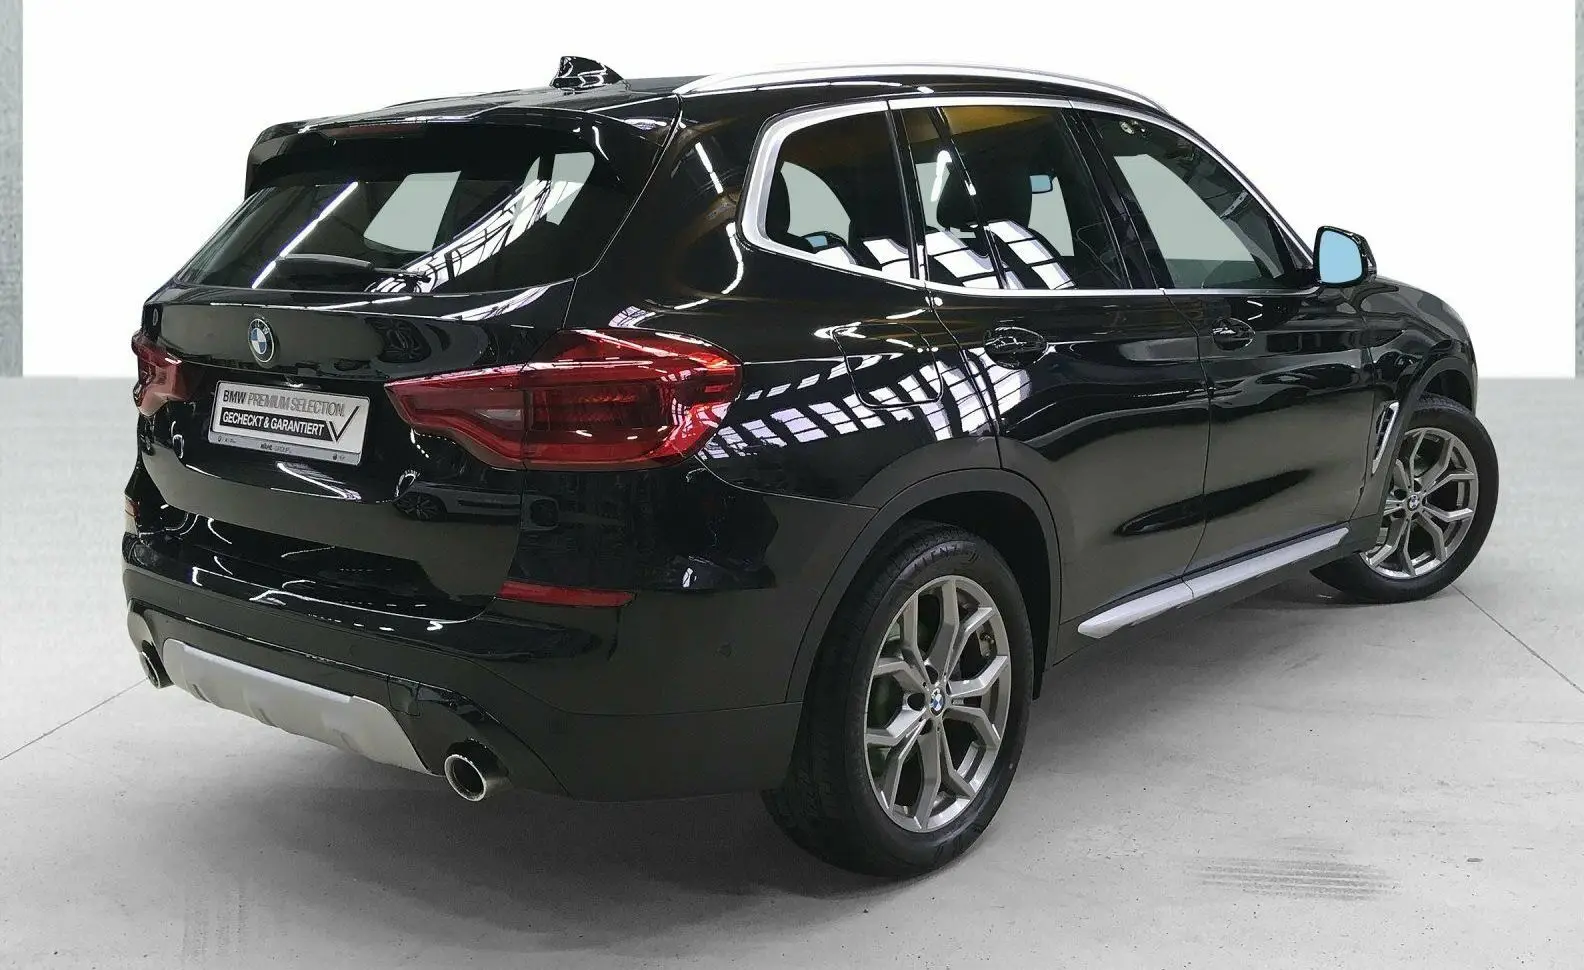 
Good Quality At Cheap Used Car Price SUV / Off-road Vehicle / Pickup Truck BMW X3 Second Car Used Used Cars And Their Prices 